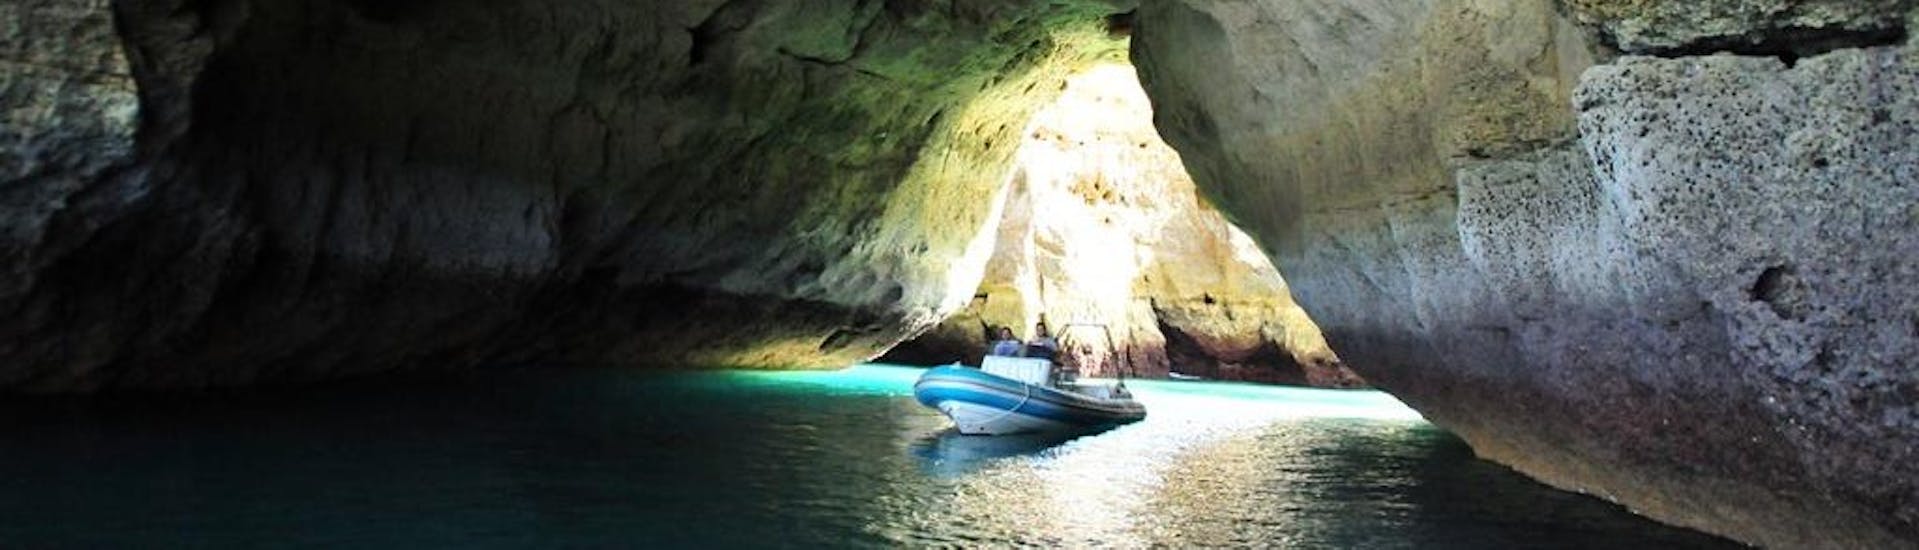 View on boat in caves during Private Boat Trip to the Benagil Cave & Praia da Marinha with Seadventure Boat Trips Algarve.